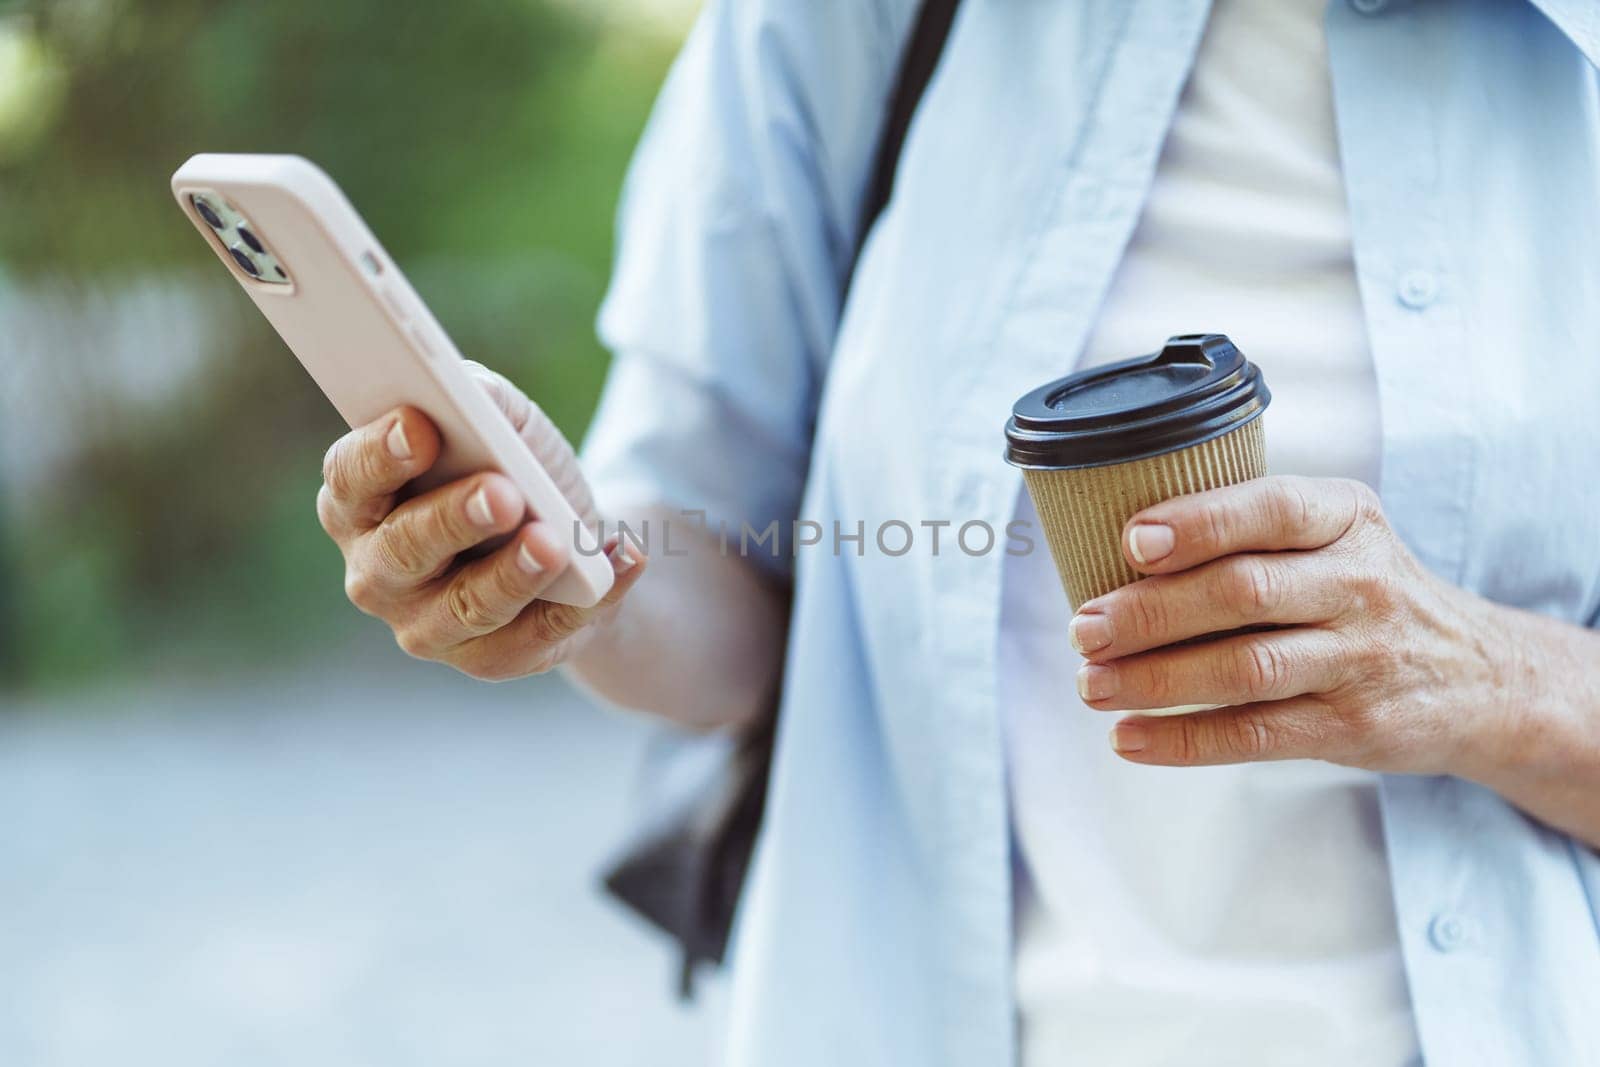 Cup of coffee alongside smartphone, symbolizing combination of digital communication and pleasure of coffee consumption. Coffee and mobile communication on internet concept. by LipikStockMedia